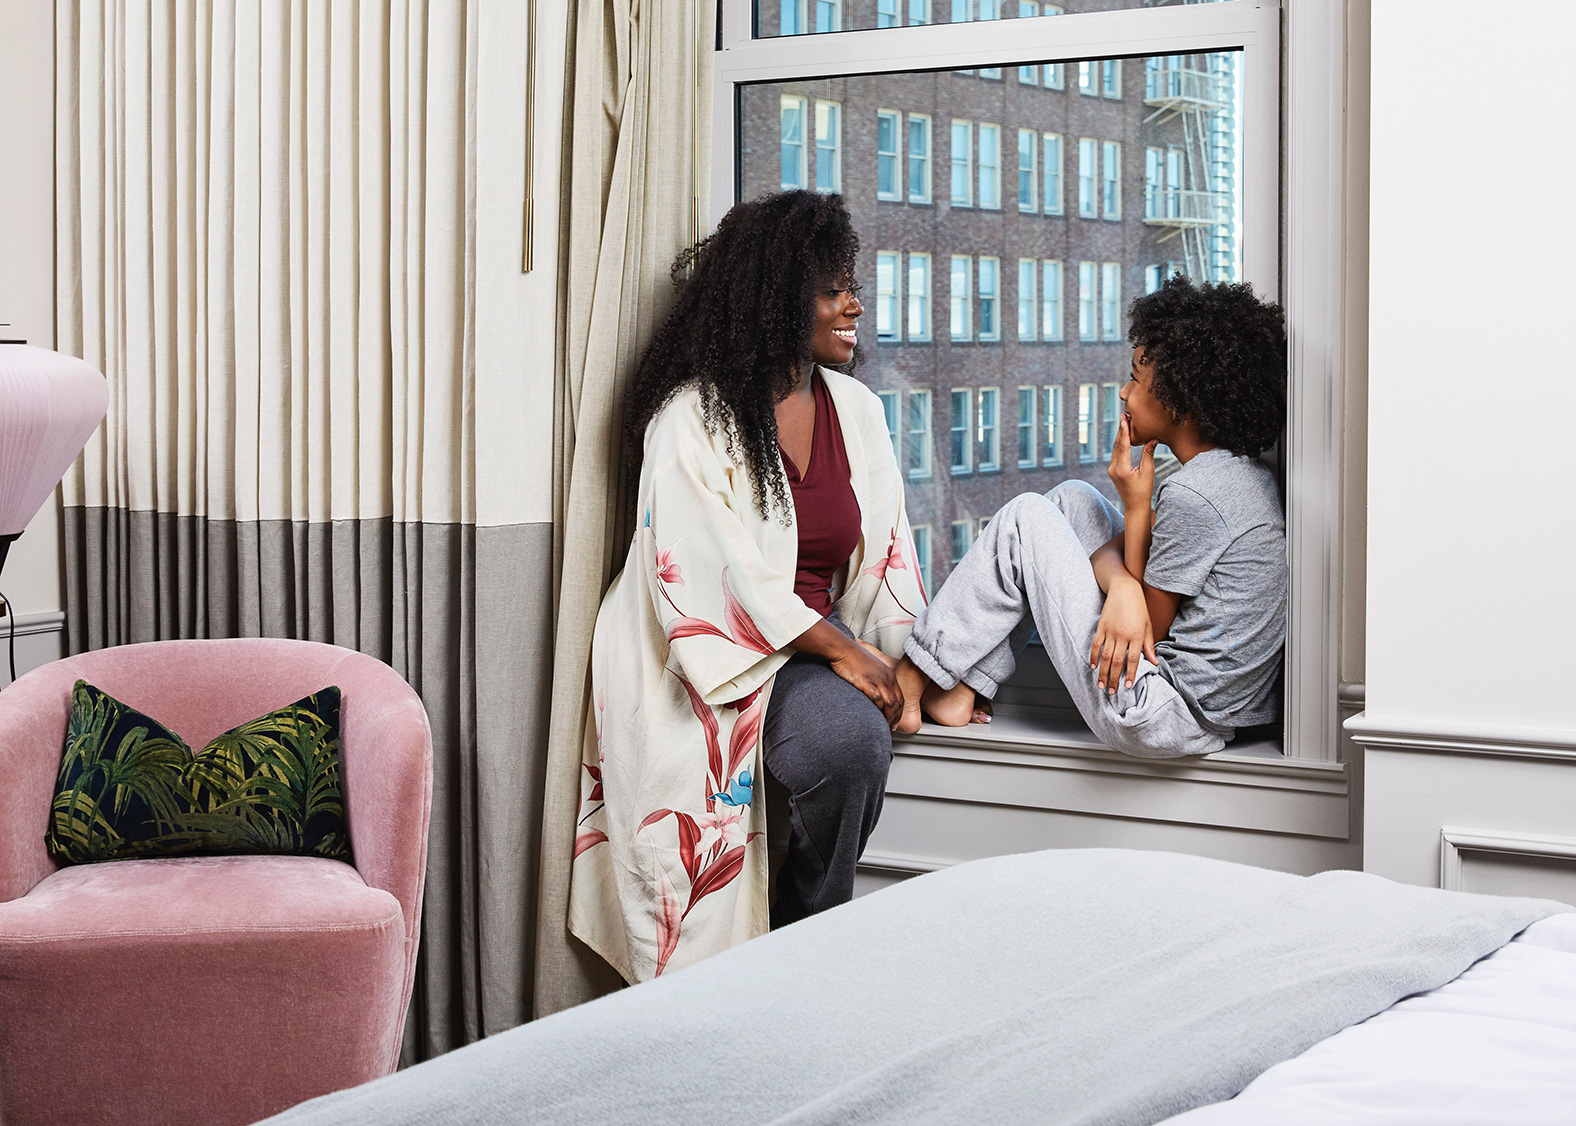 Heartwarming hotel moment captured by Kimberly Genevieve: A joyful mom and son laughing together in a cozy hotel room